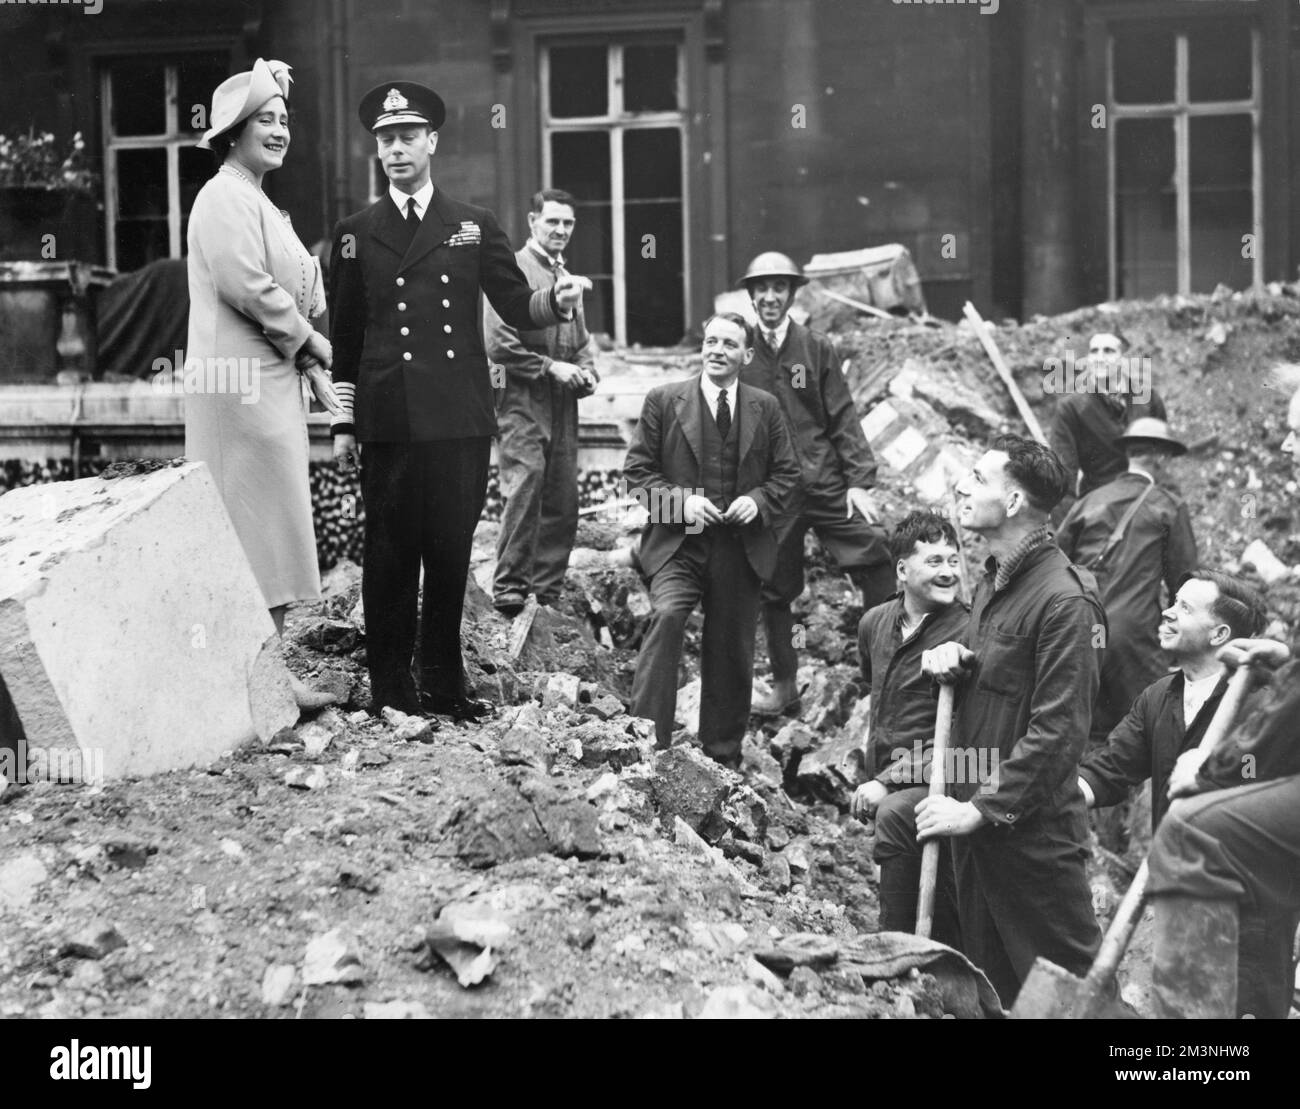 King George VI and Queen Elizabeth pictured among the rubble at Buckingham Palace following German air raids during the Blitz, September 1940.  The Palace suffered bomb damage on 8 September and on the morning of the 13th, the King and Queen were in residence when a bomb was dropped into the Quadrangle.  They escaped unhurt but one workman was killed.     Date: 1940 Stock Photo